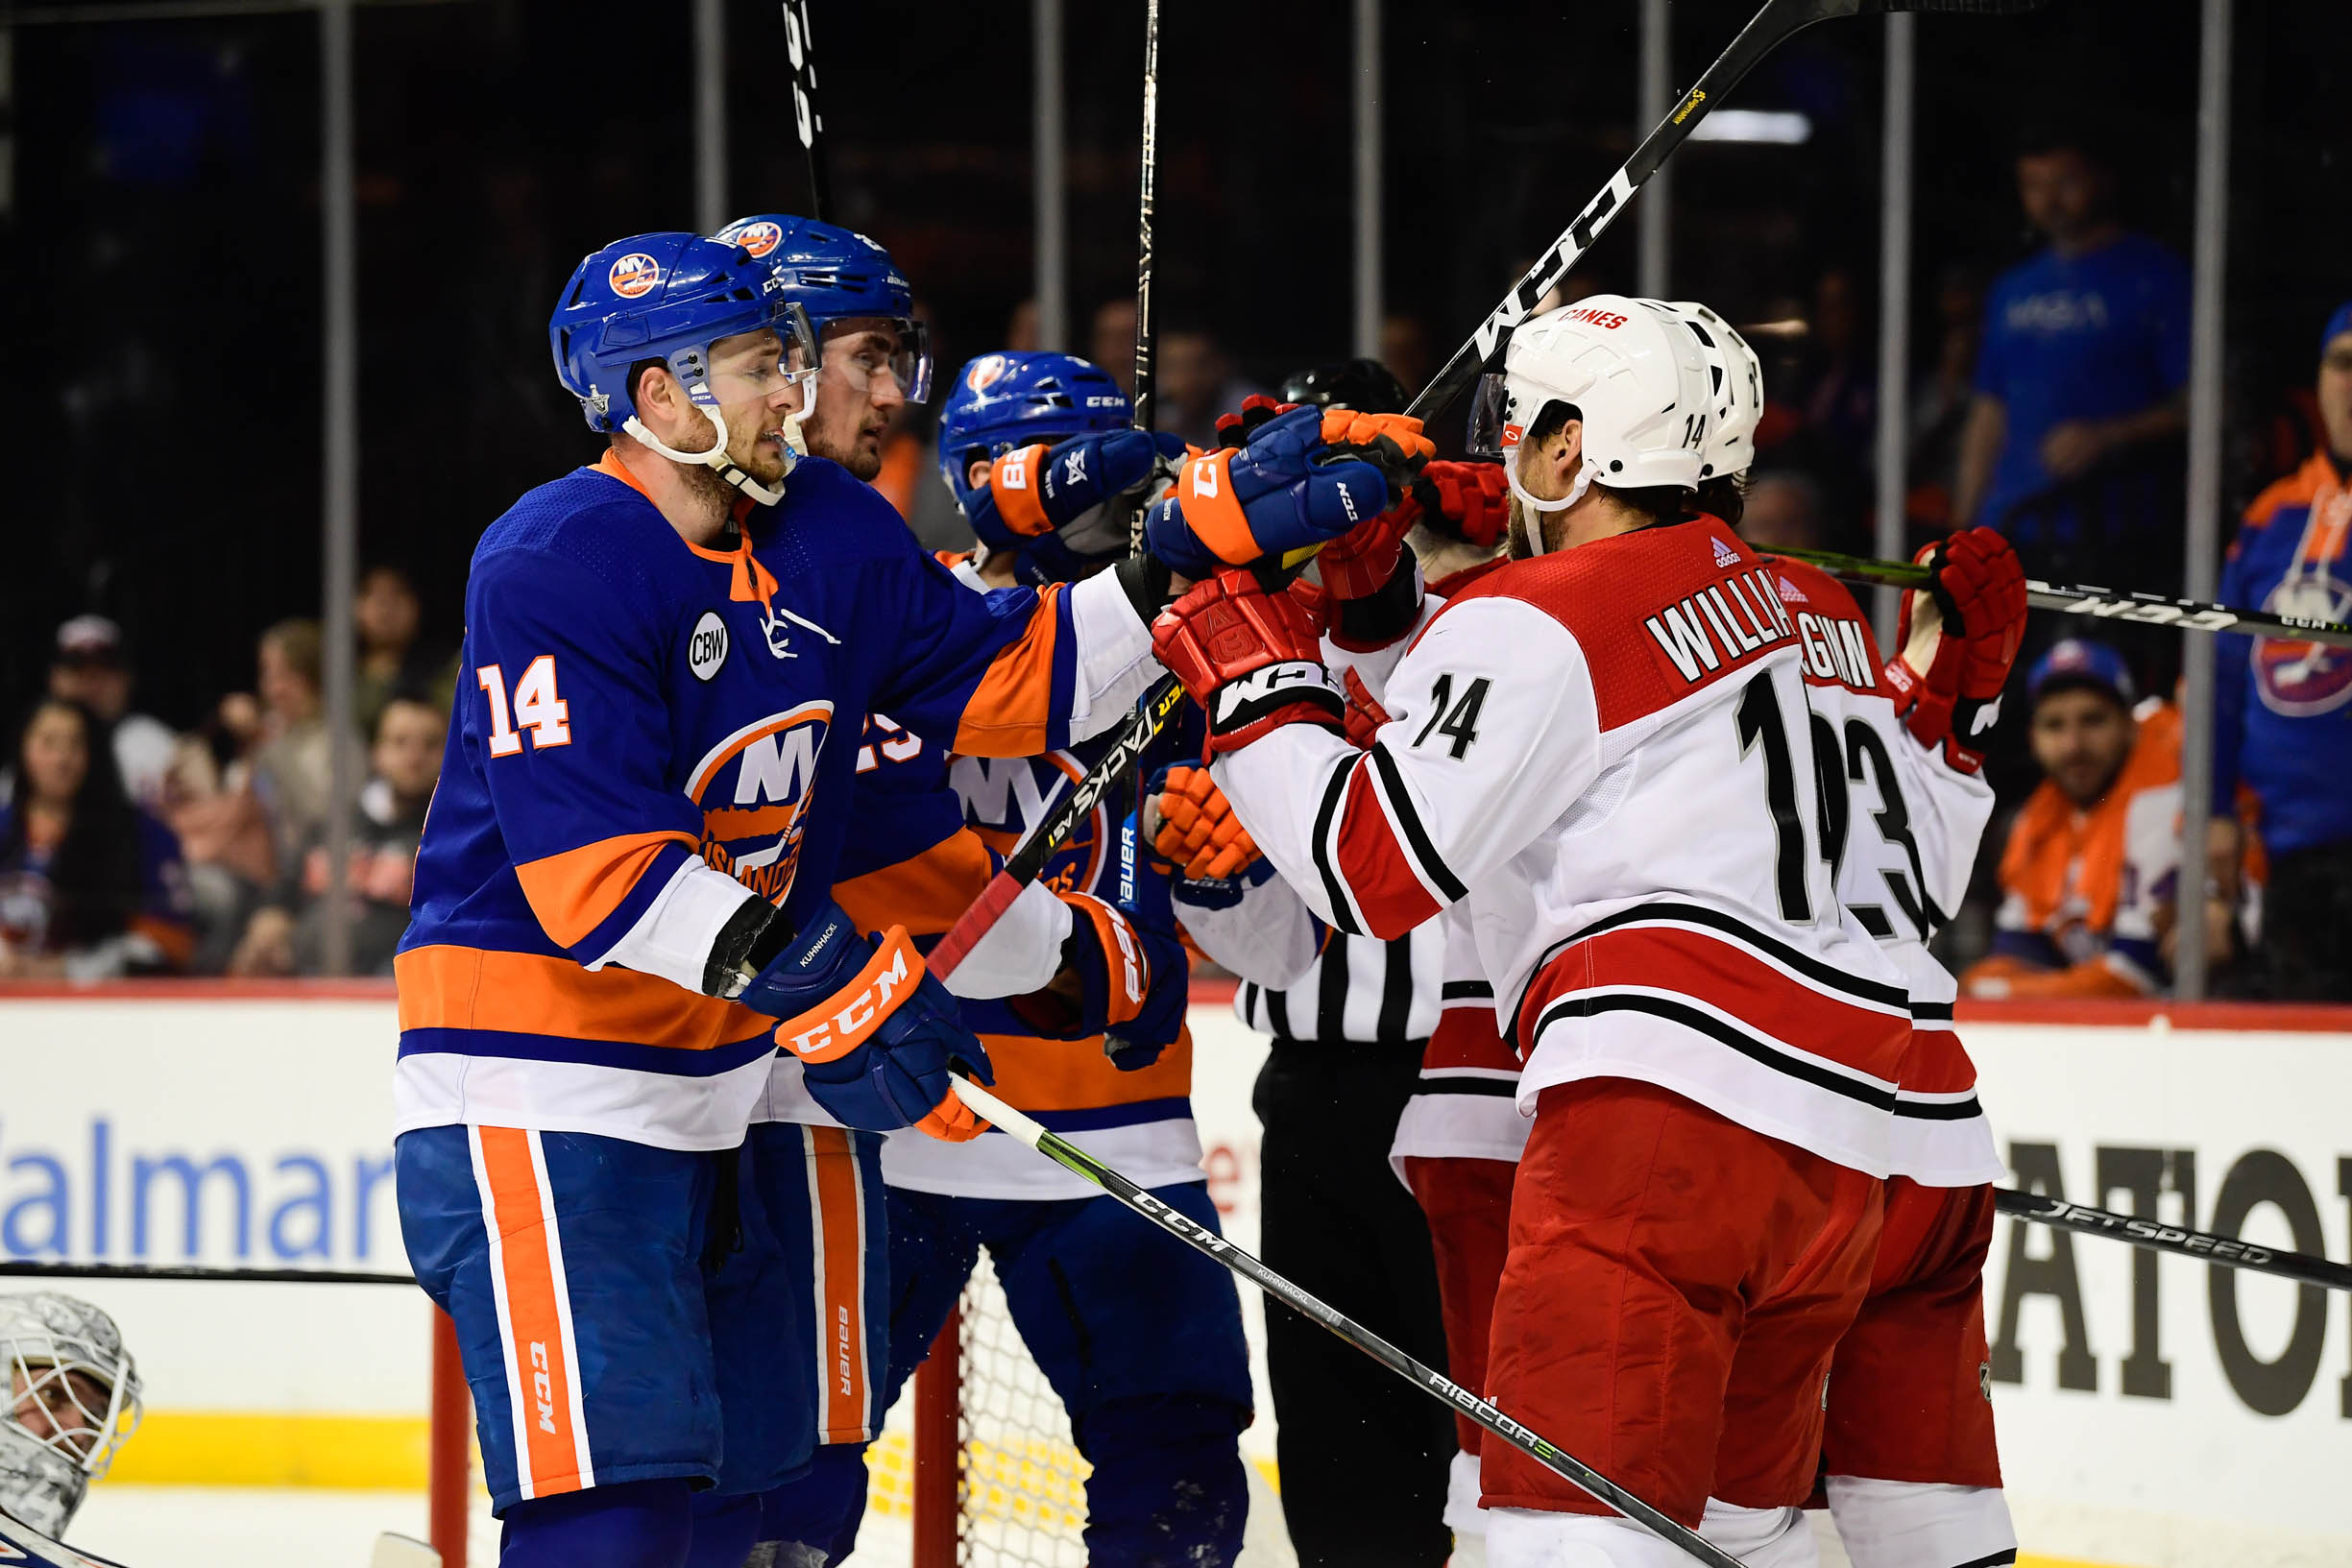 Apr 26, 2019; Brooklyn, NY, USA; New York Islanders right wing Tom Kuhnhackl (14) and Carolina Hurricanes right wing Justin Williams (14) scuffle during the first period in game one of the second round of the 2019 Stanley Cup Playoffs at Barclays Center. Mandatory Credit: Catalina Fragoso-USA TODAY Sports